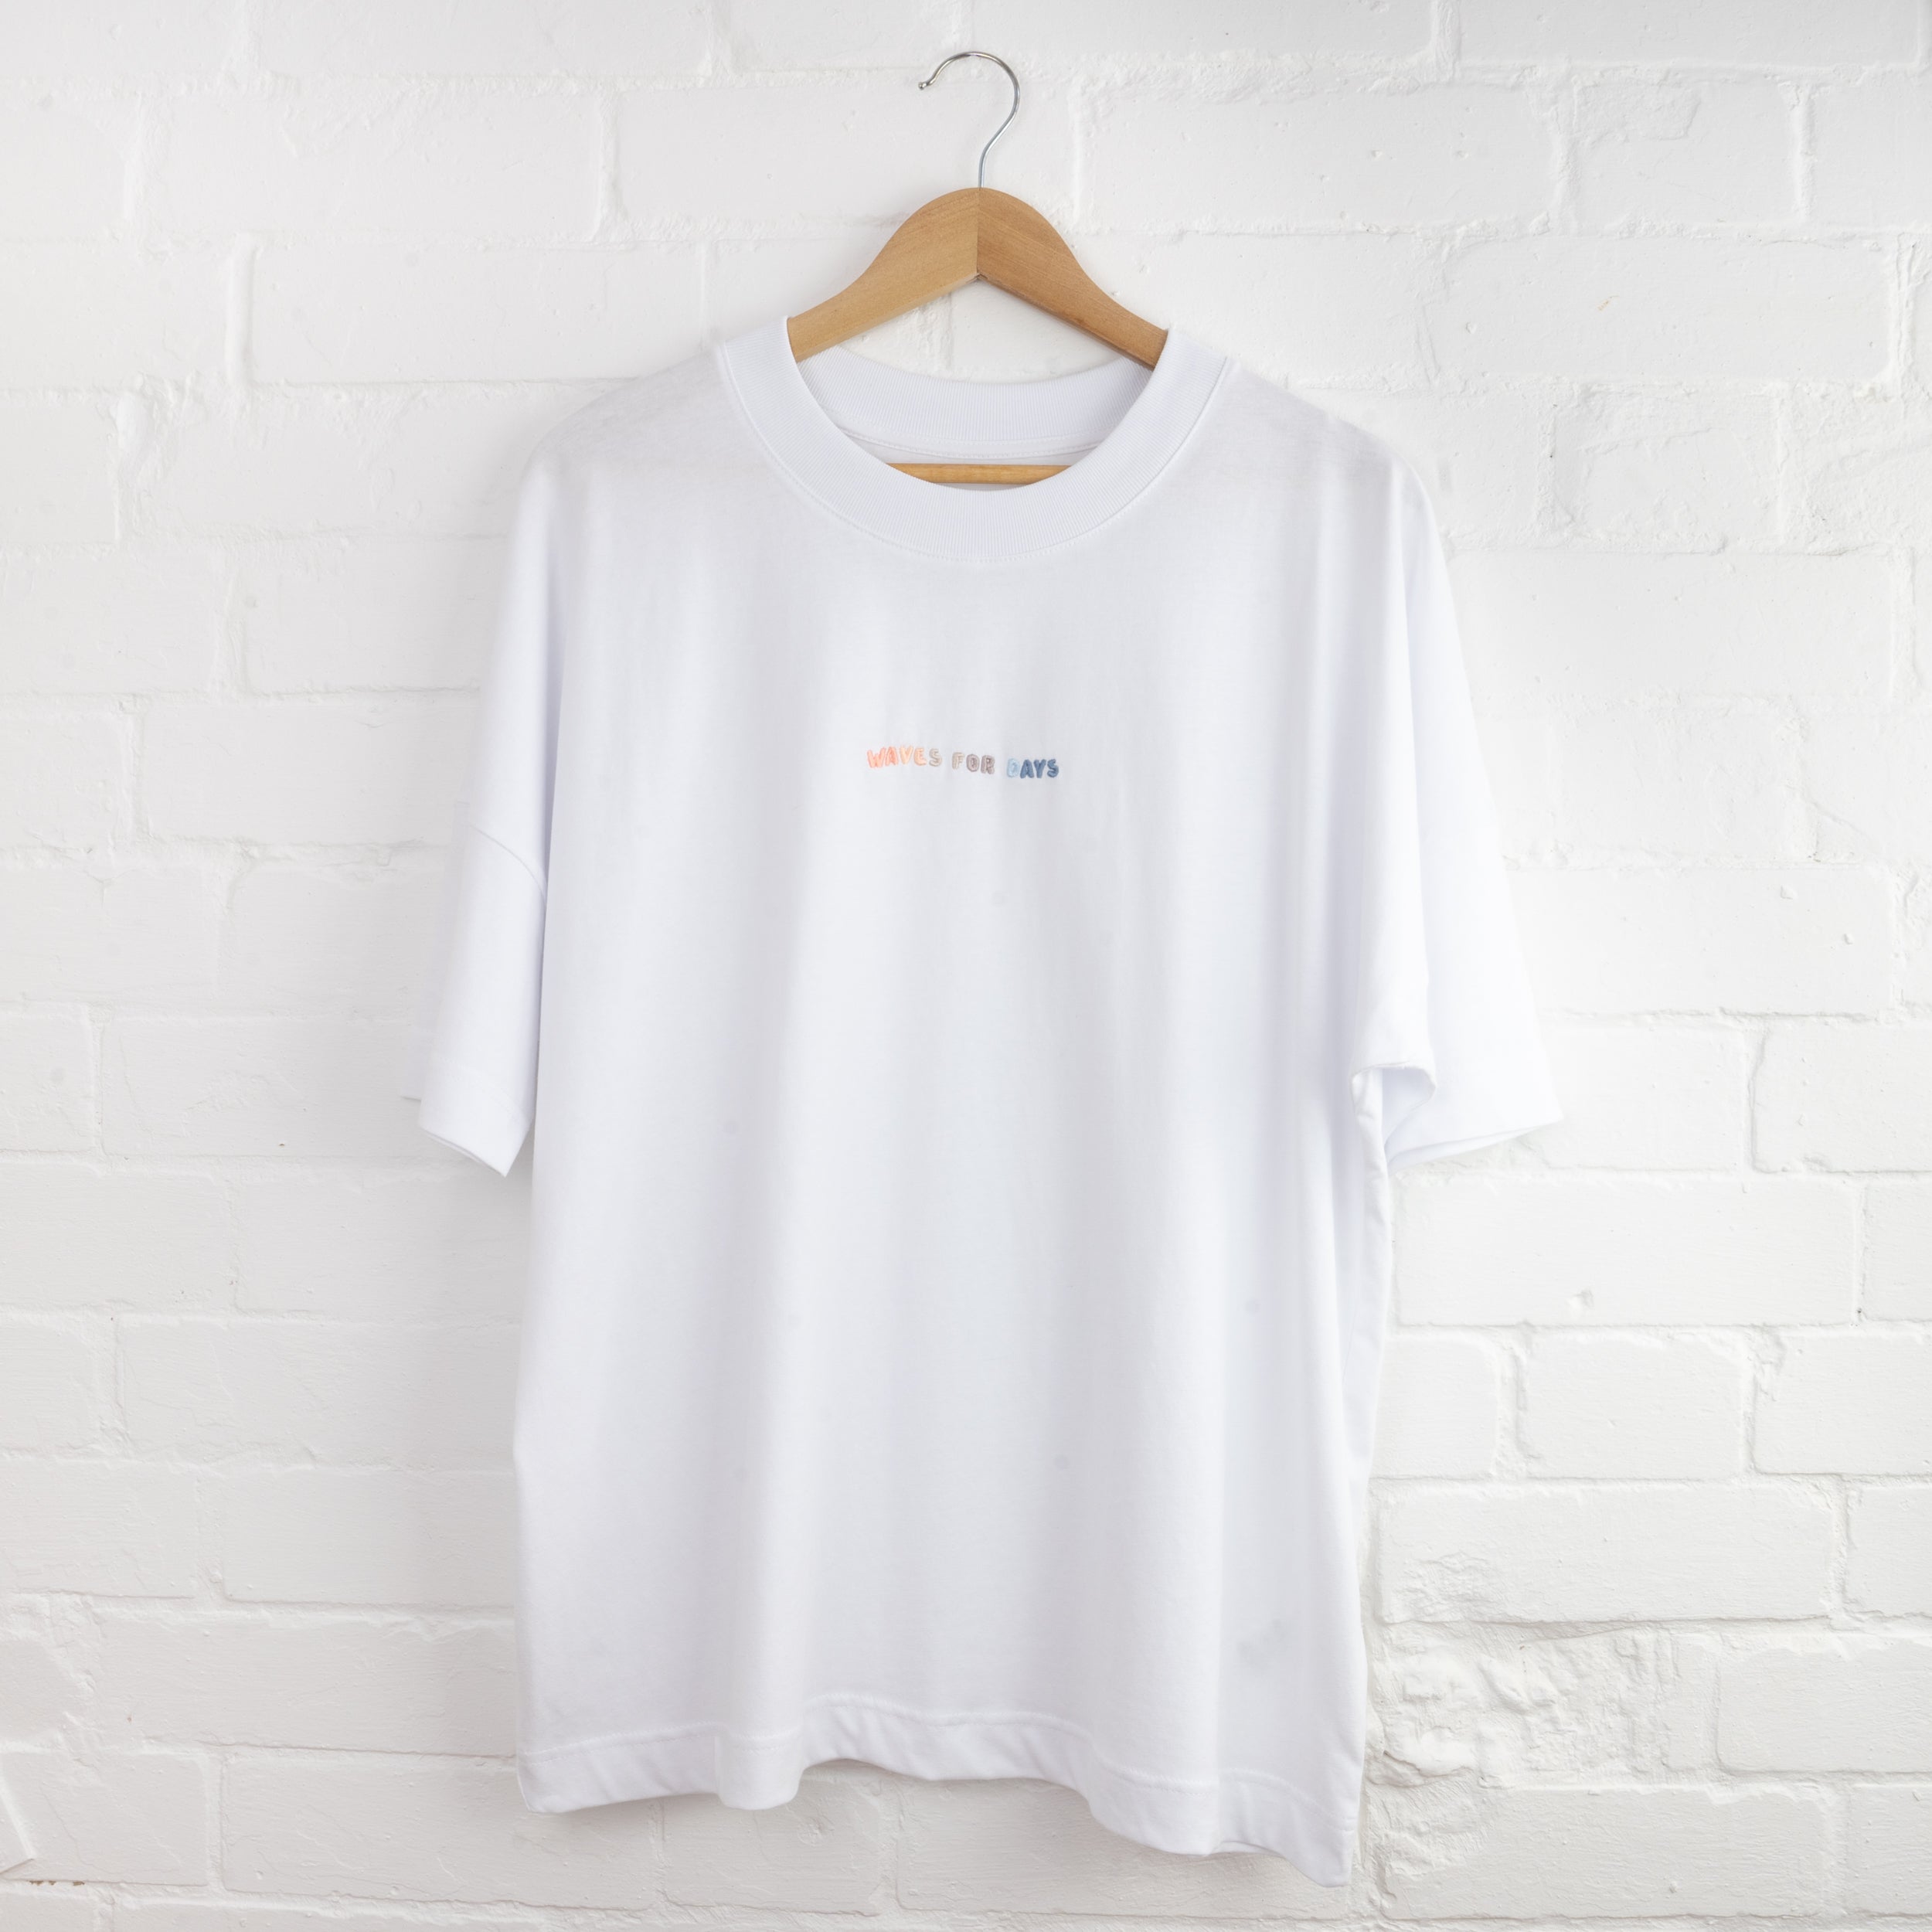 Waves For Days Embroidered T-Shirt - Pineapple Island